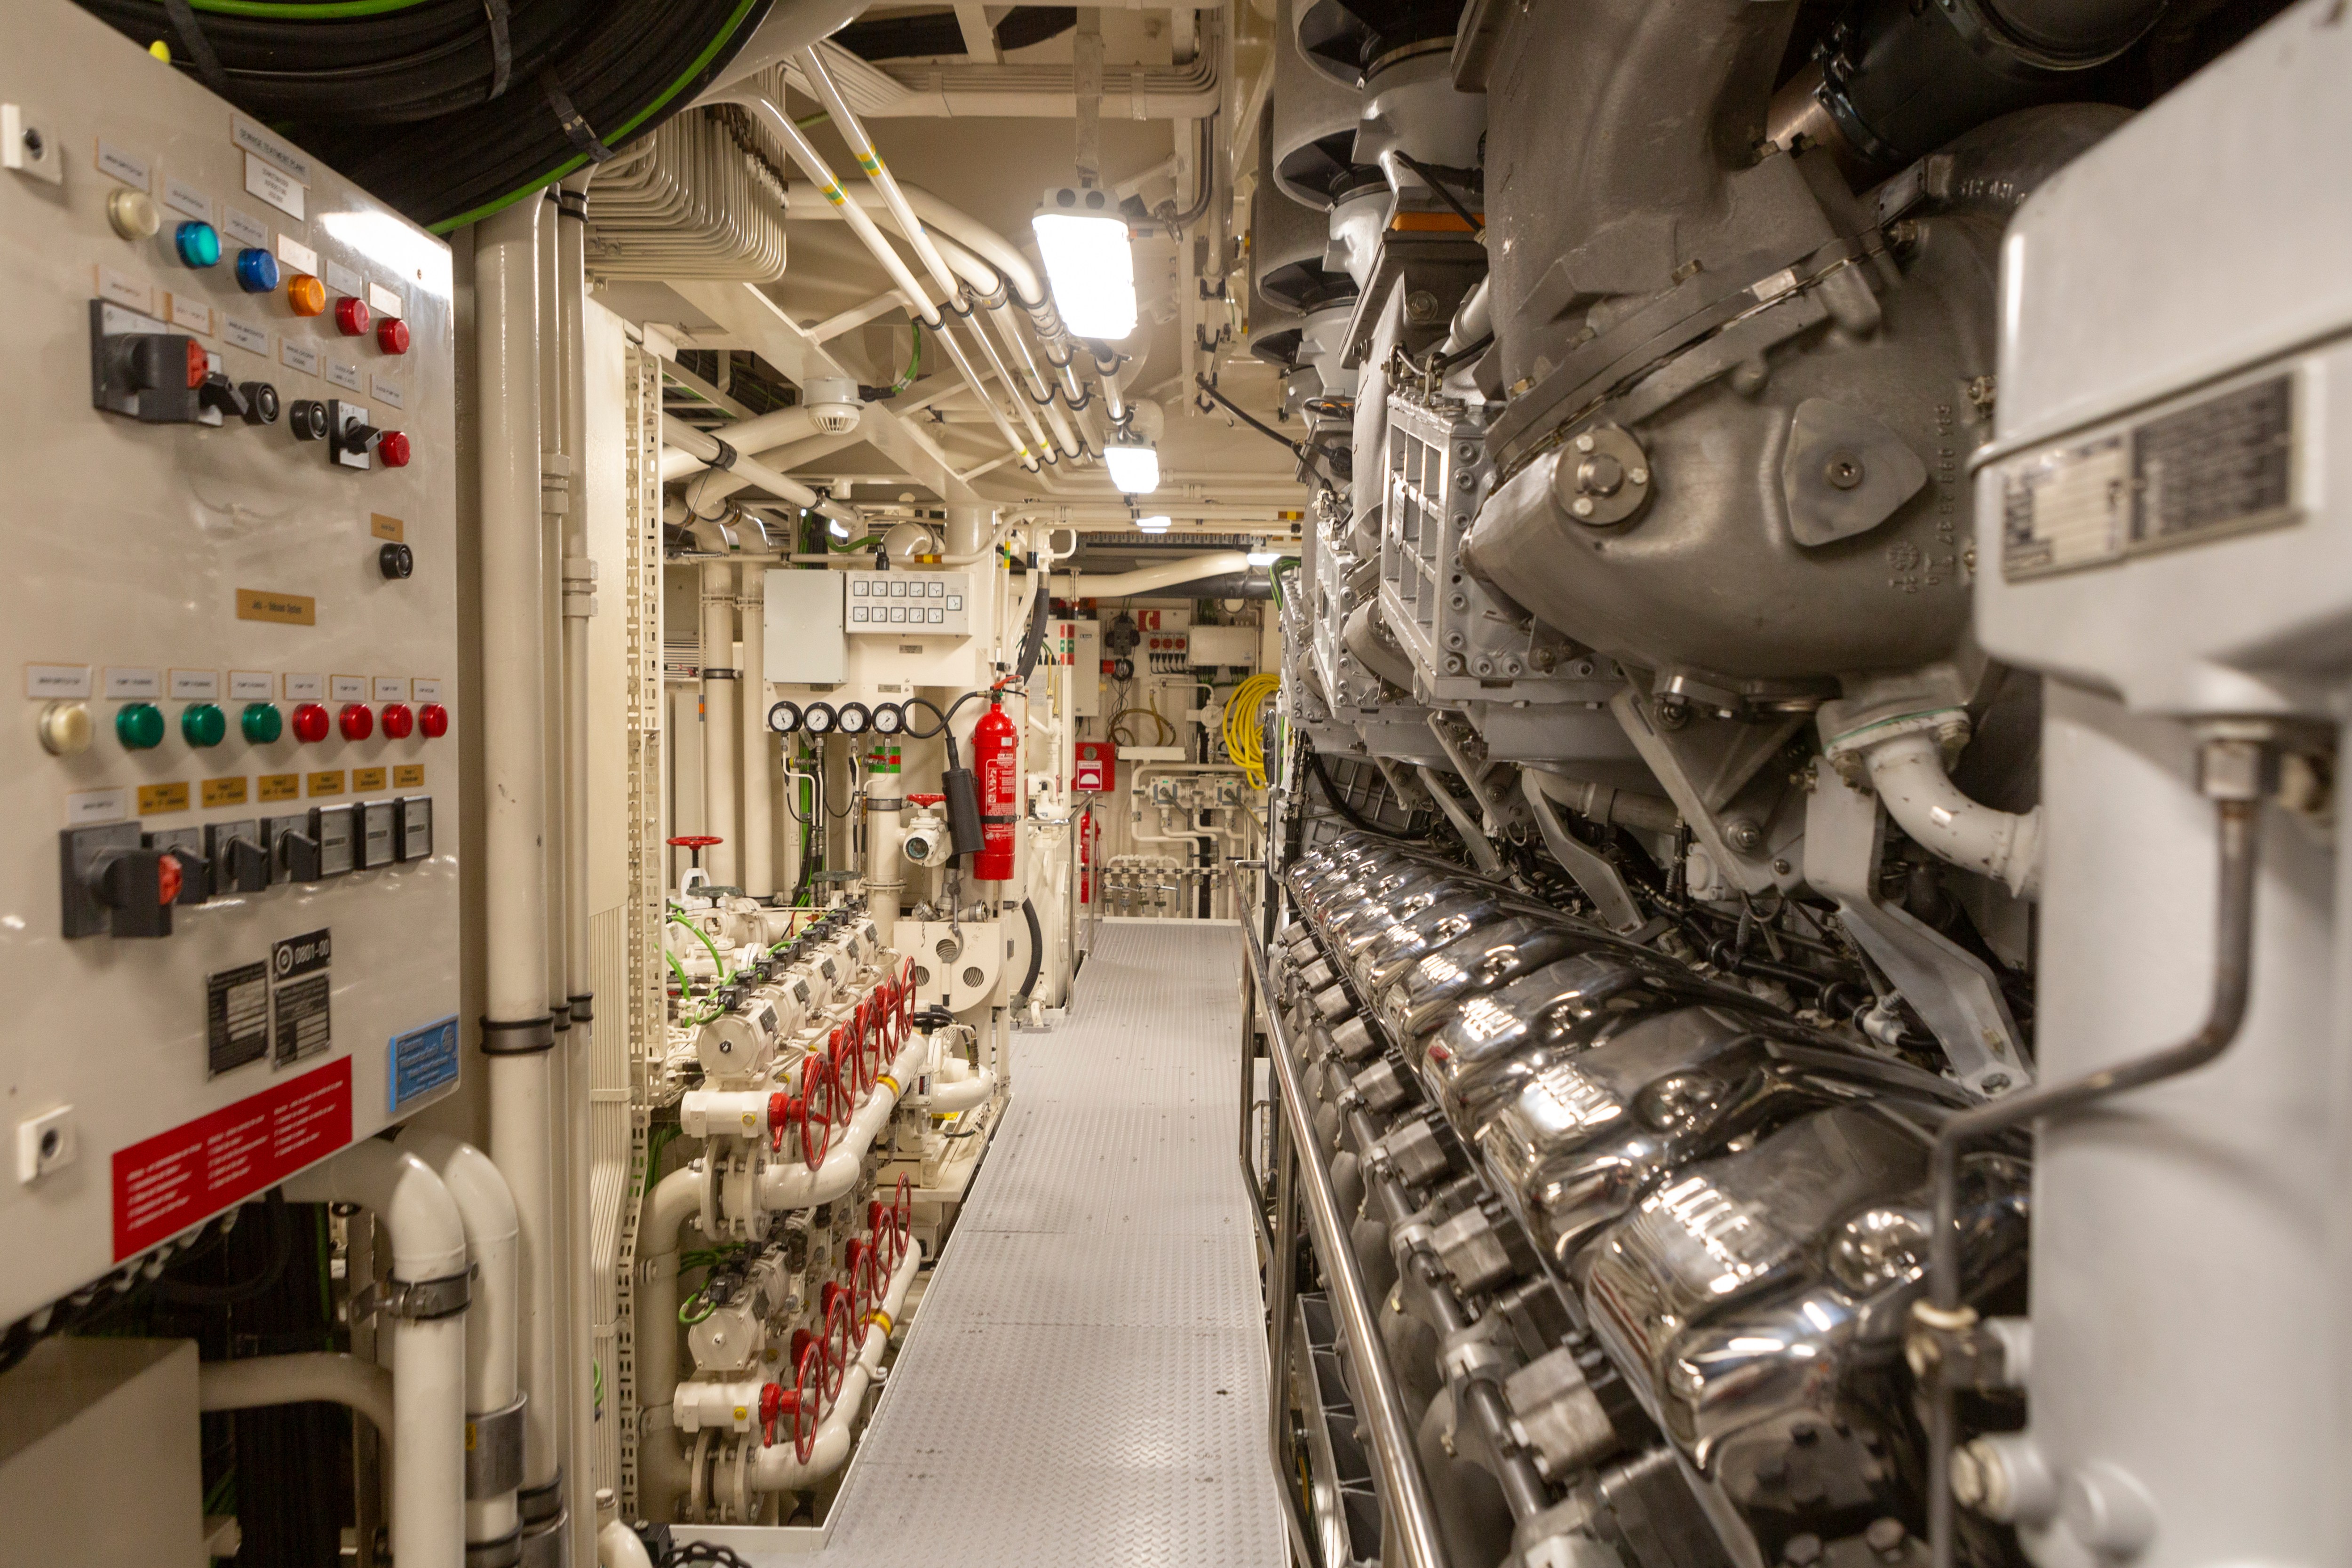 One of the four 10,000 horsepower engines that can propel Carinthia VII to 26 knots (about 30 mph)